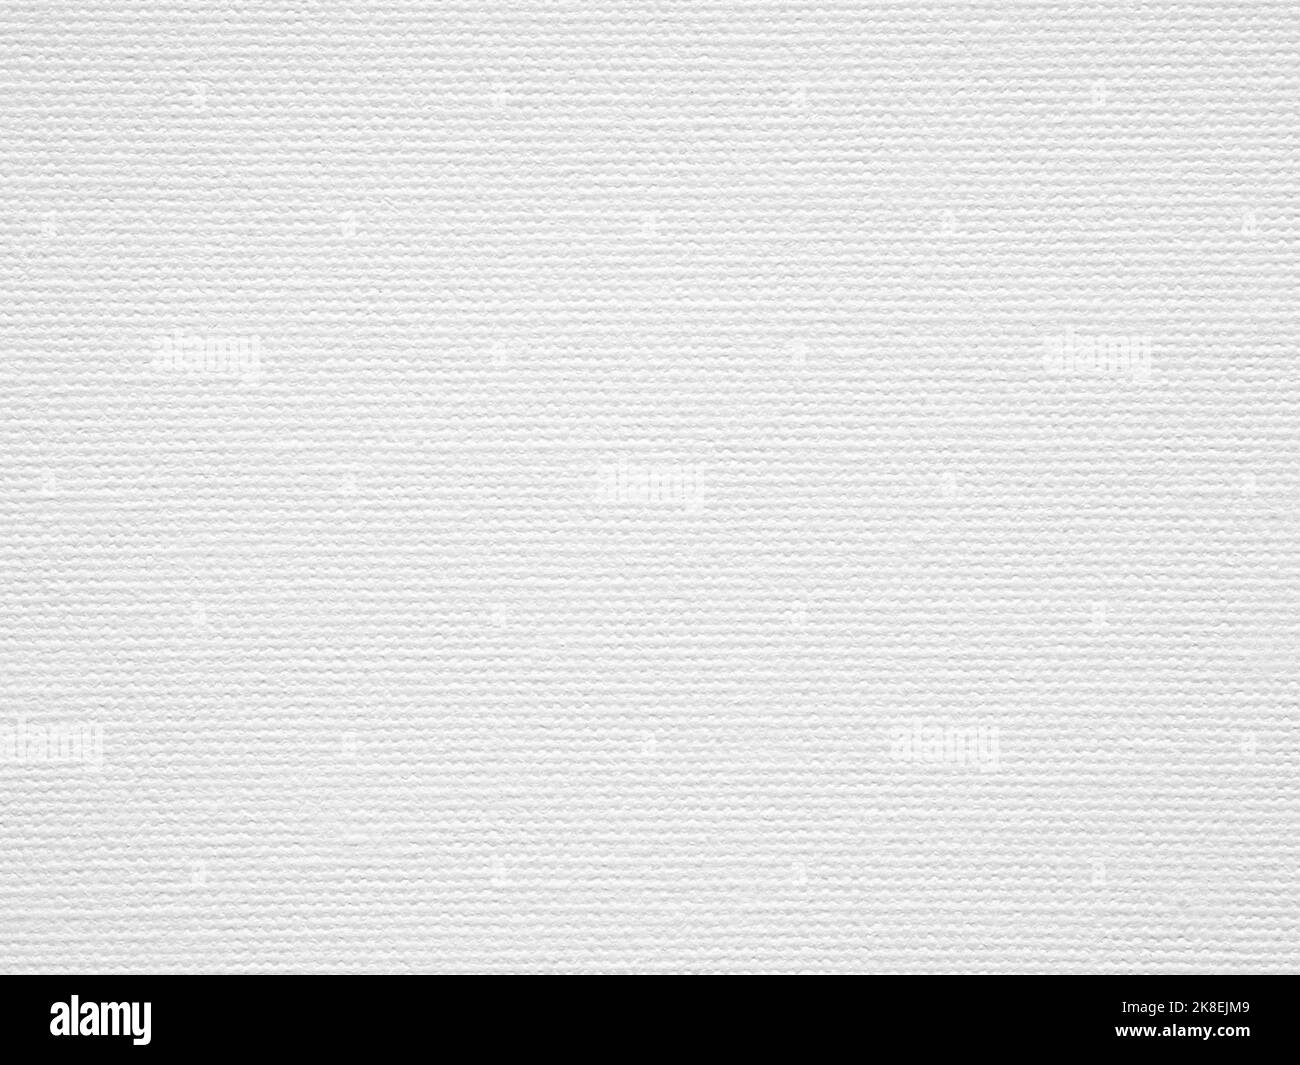 Light linen clean white watercolor canvas painting background. Effect for making artwork, painting, designs decoration, background concepts, text Stock Photo